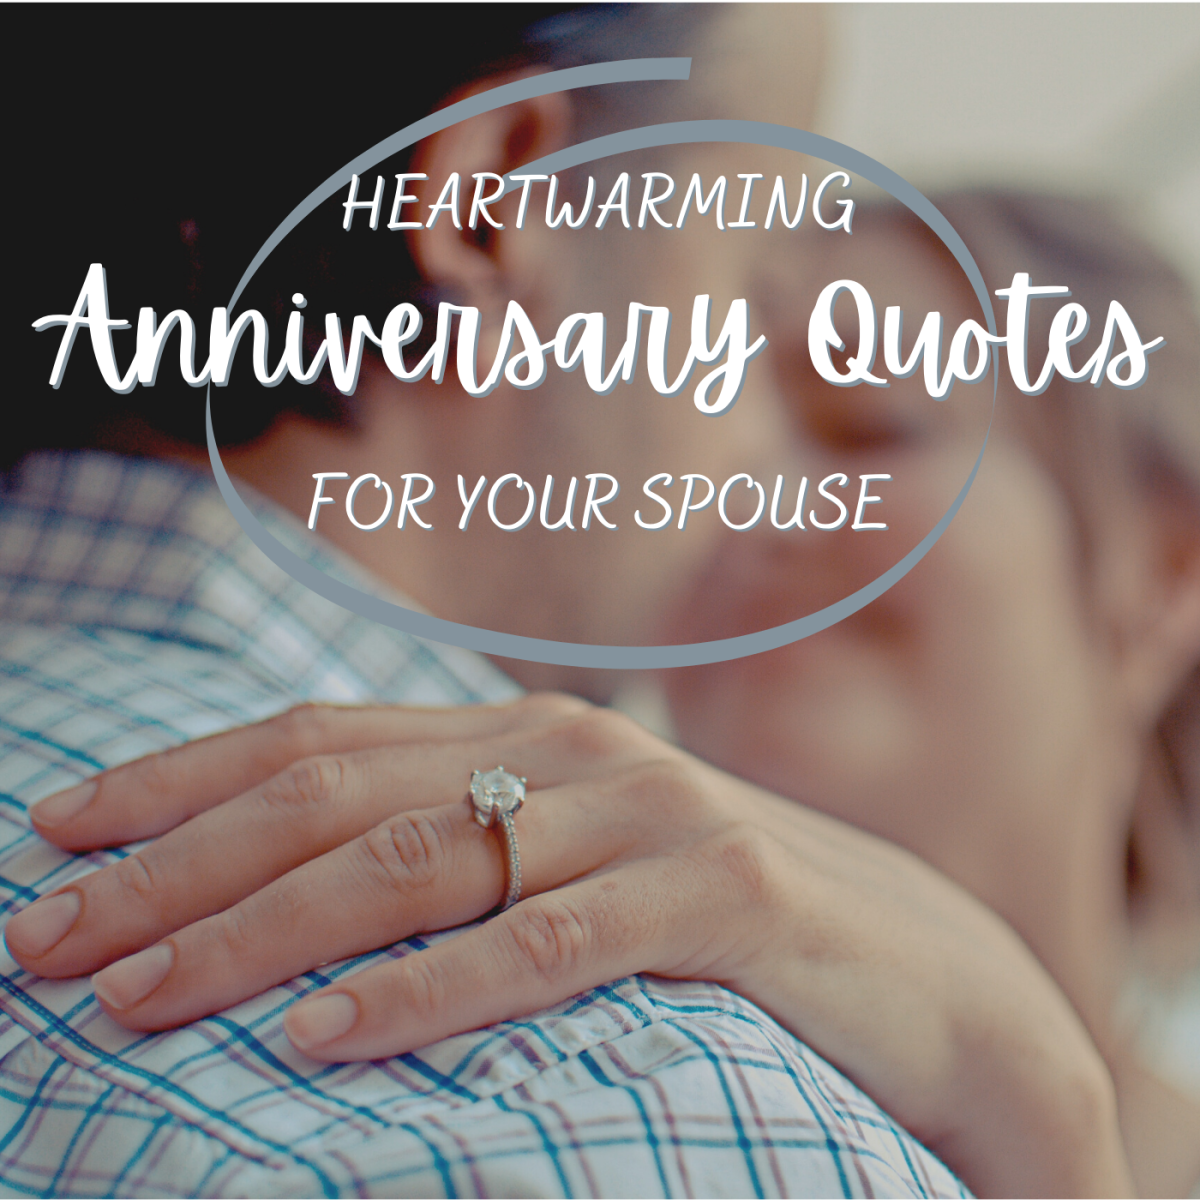 40 Great Marriage Anniversary Quotes for Your Spouse